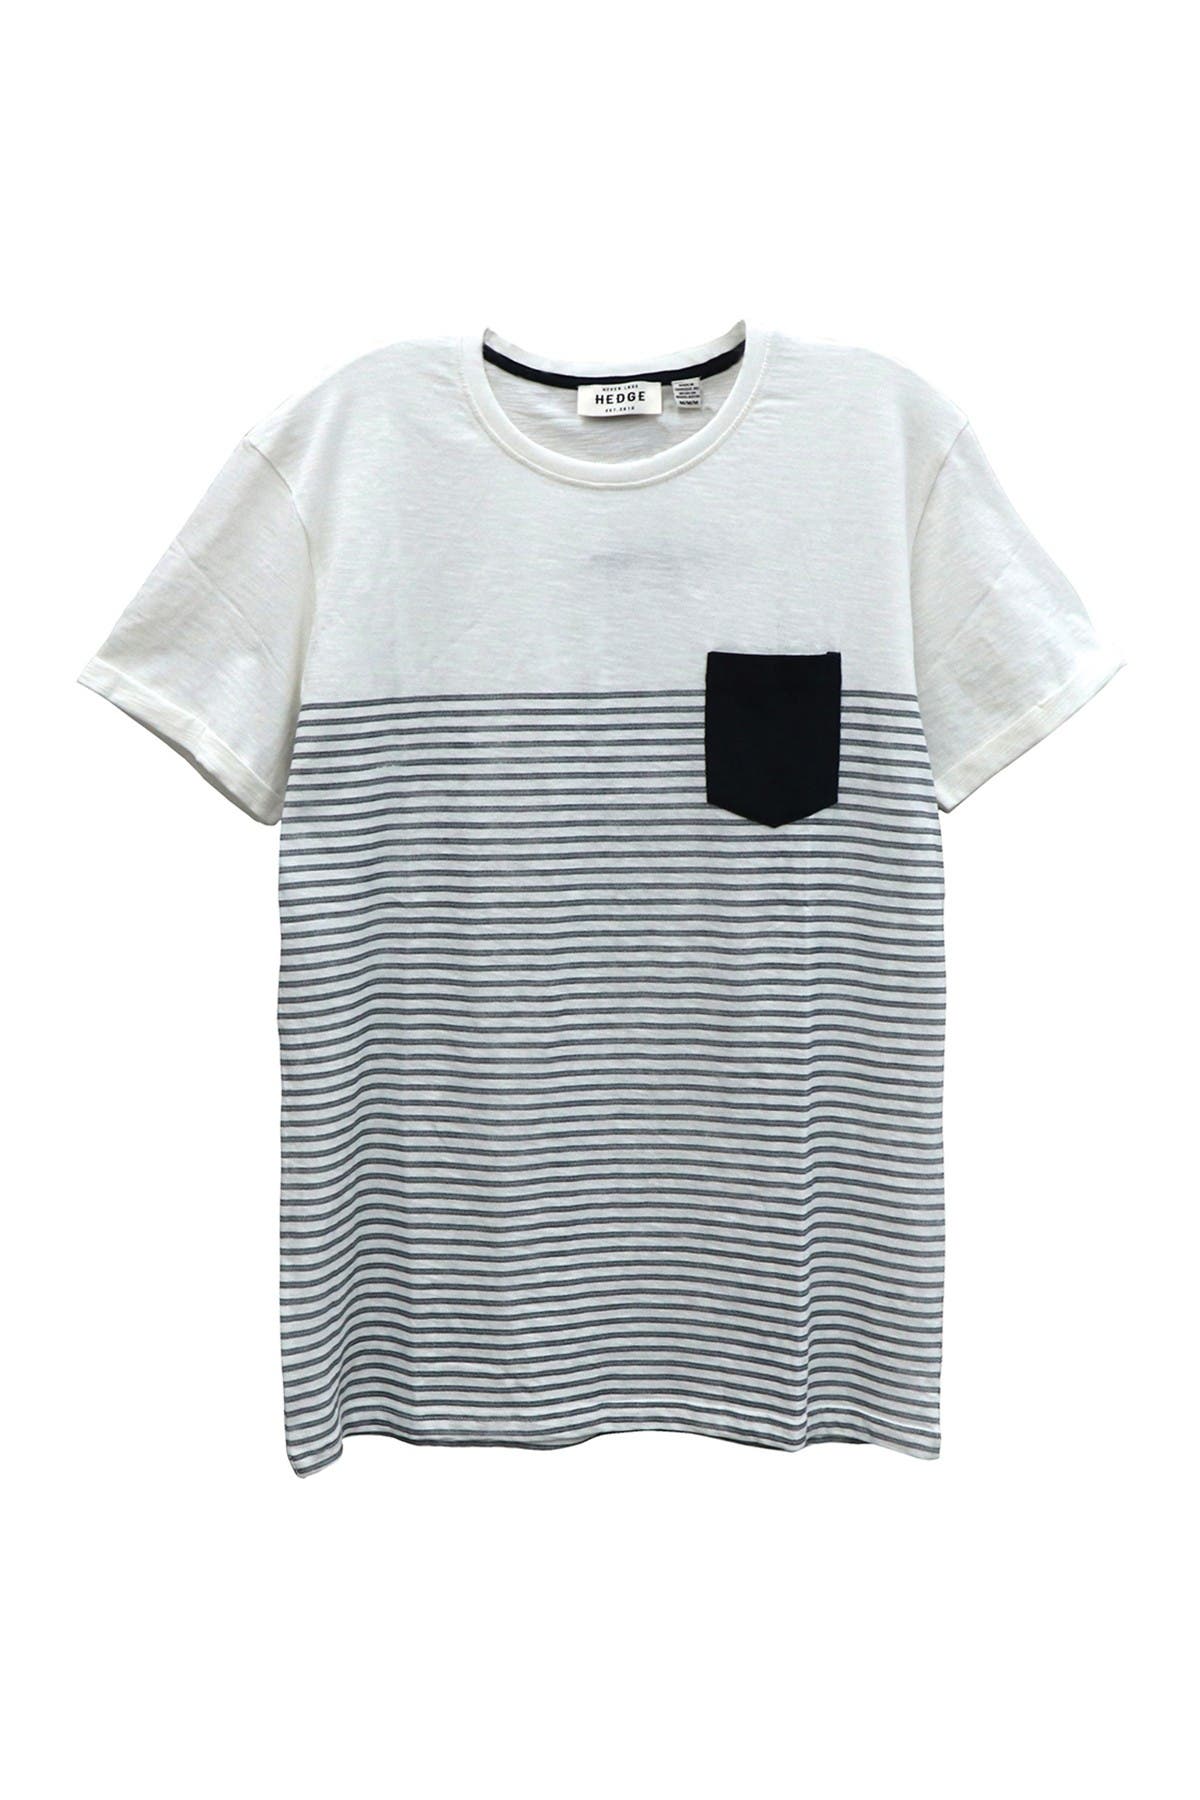 Hedge Colorblock Stripe T-shirt In 24wo Offwh